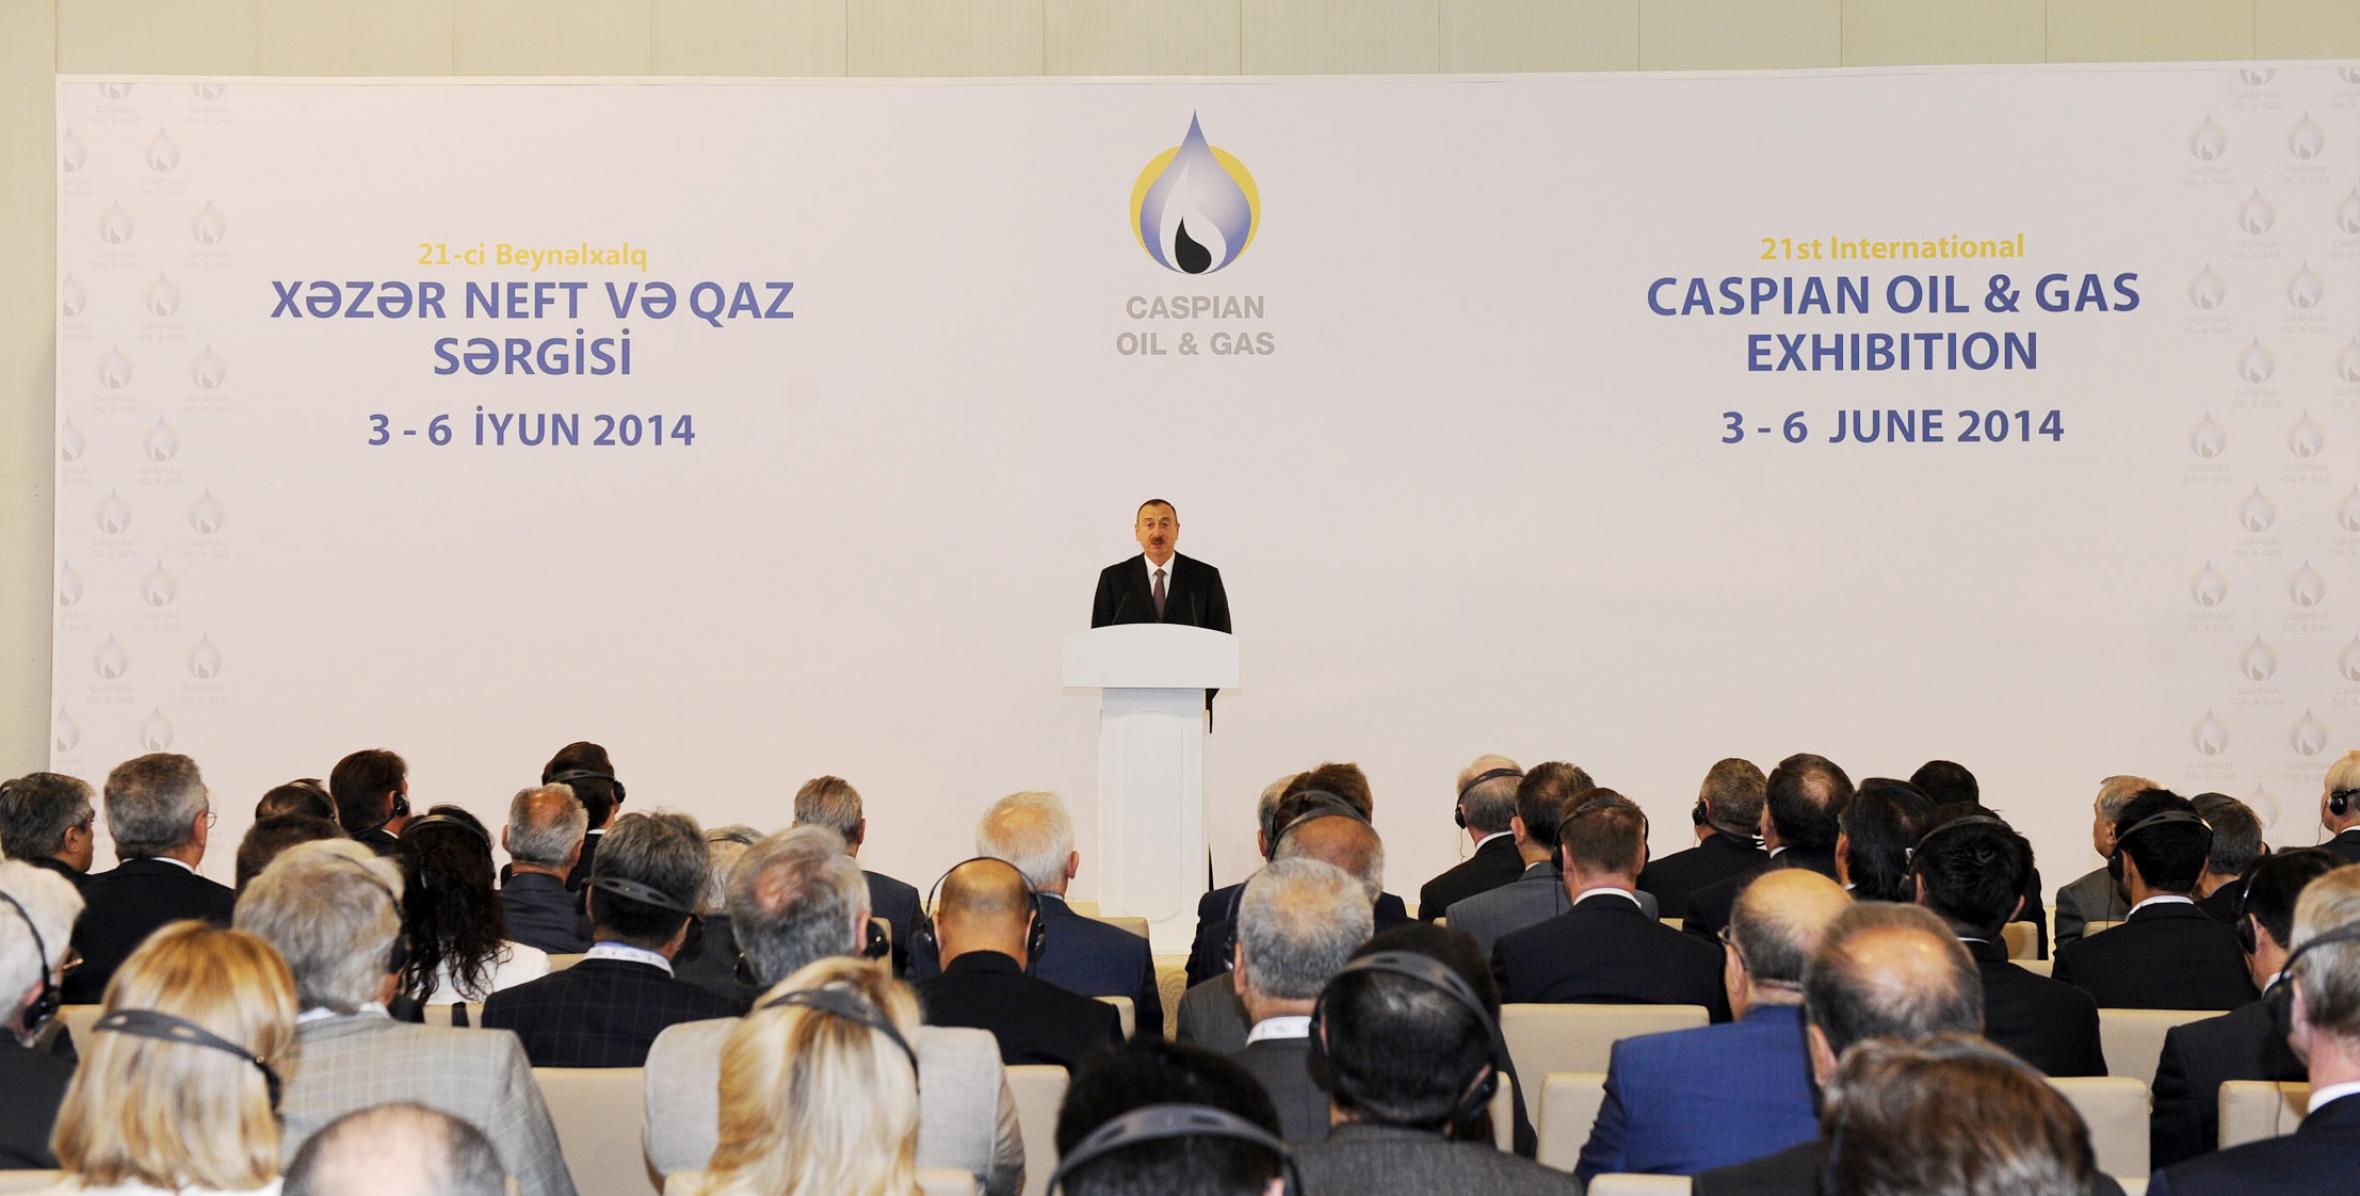 Speech by Ilham Aliyev at the 21st International Exhibition “Caspian Oil and Gas” in Baku